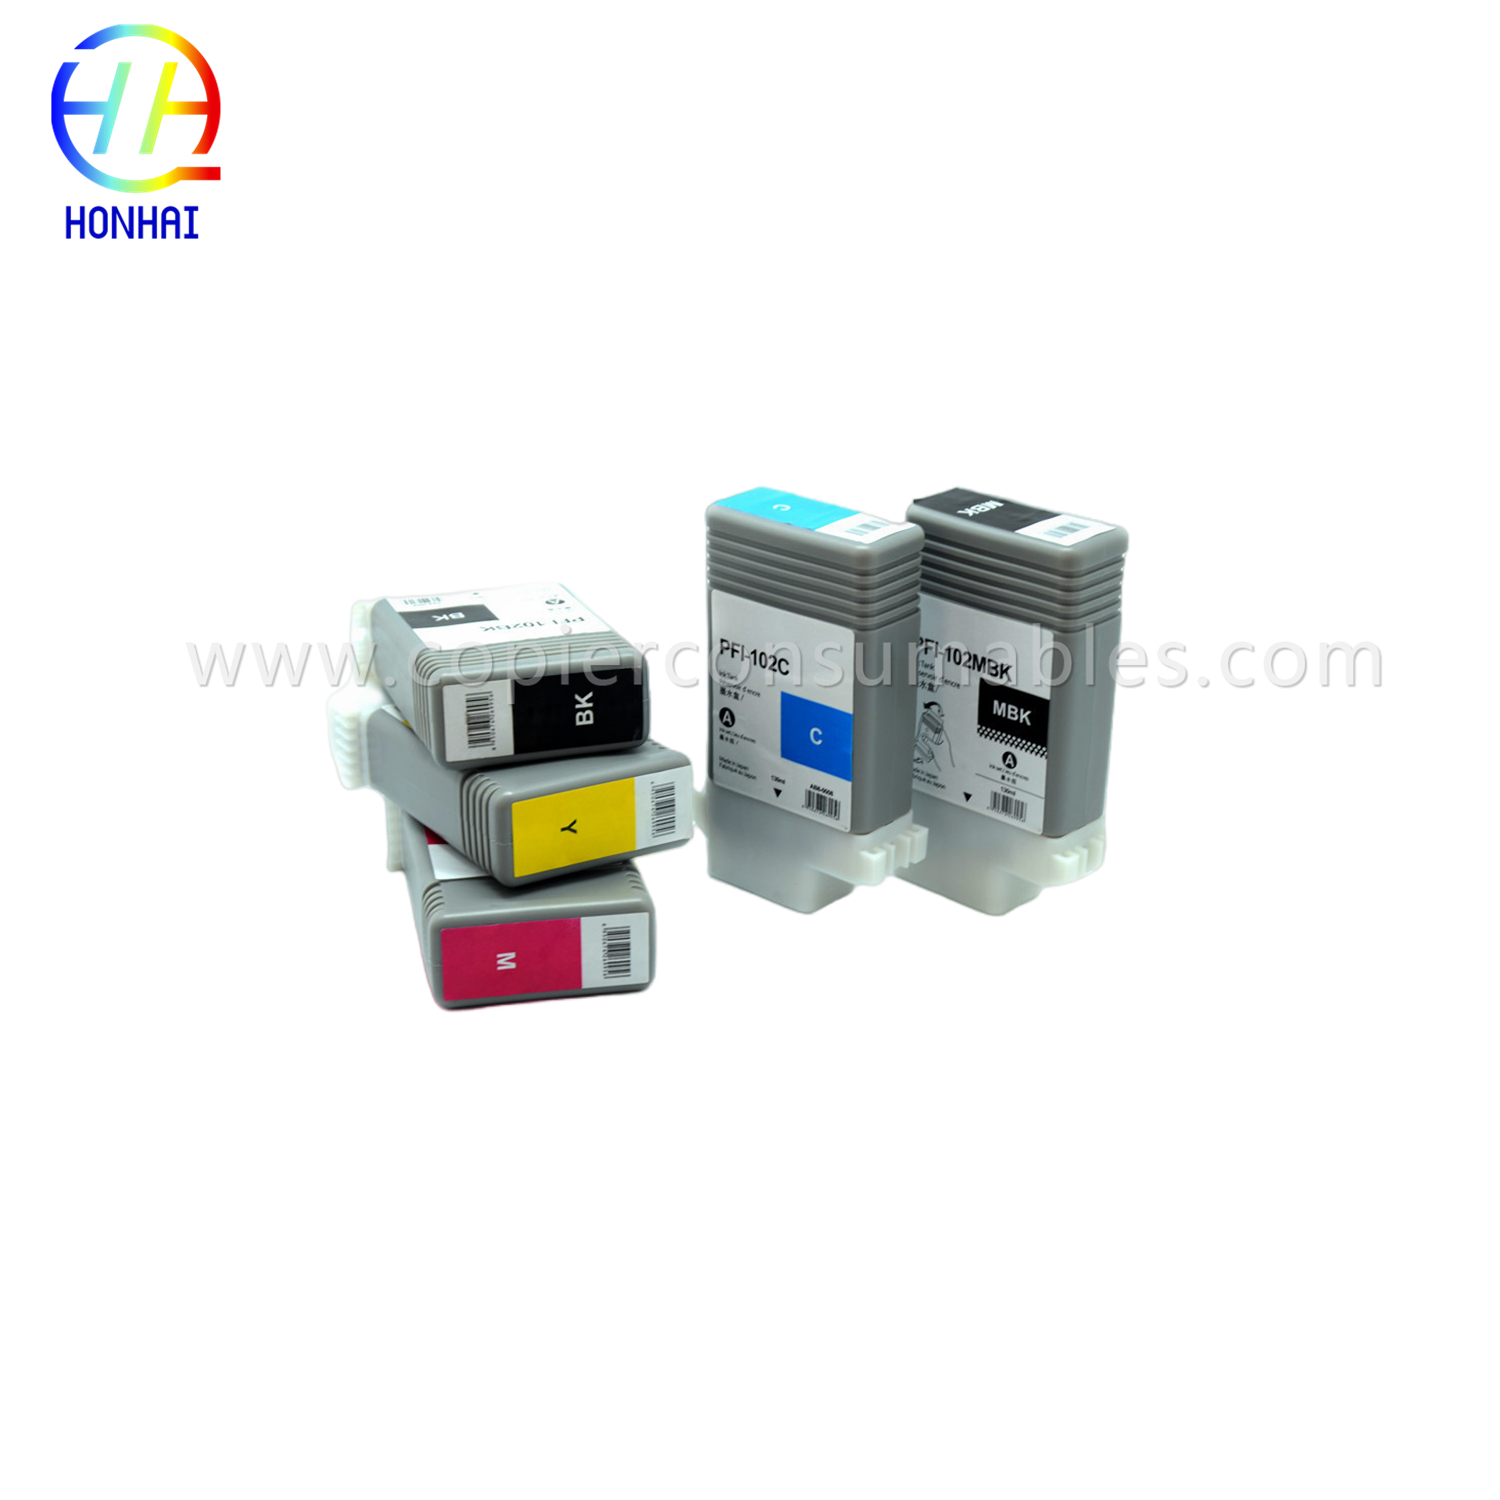 Ink Cartridge for Canon Image Prograf Ipf500 Ipf510 Ipf600 Ipf605 Ipf610 Ipf650 Ipf655 Ipf700